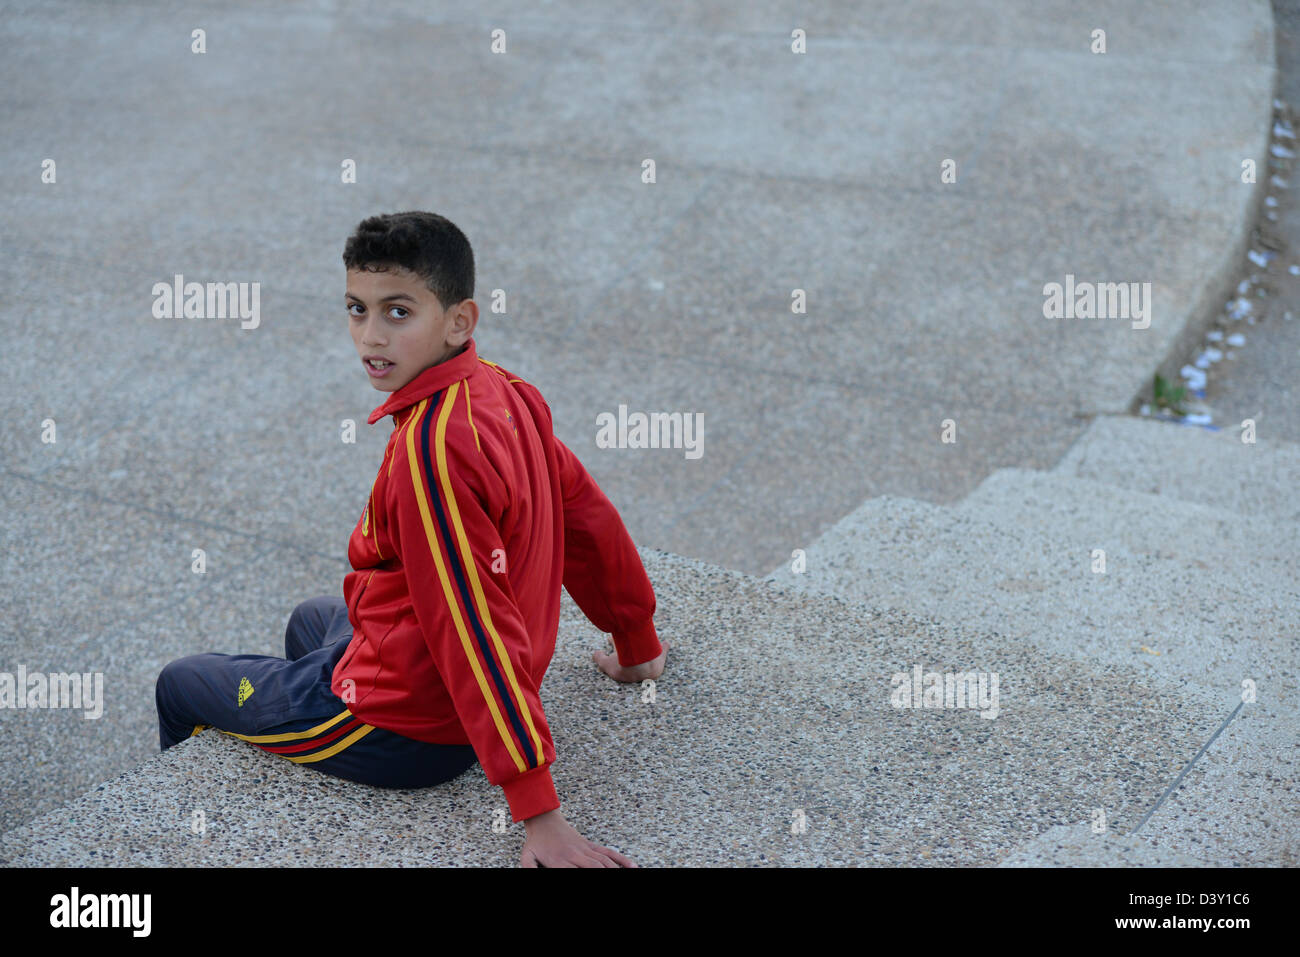 Young Moroccan boy, wearing sports wear, looking into camera Stock Photo